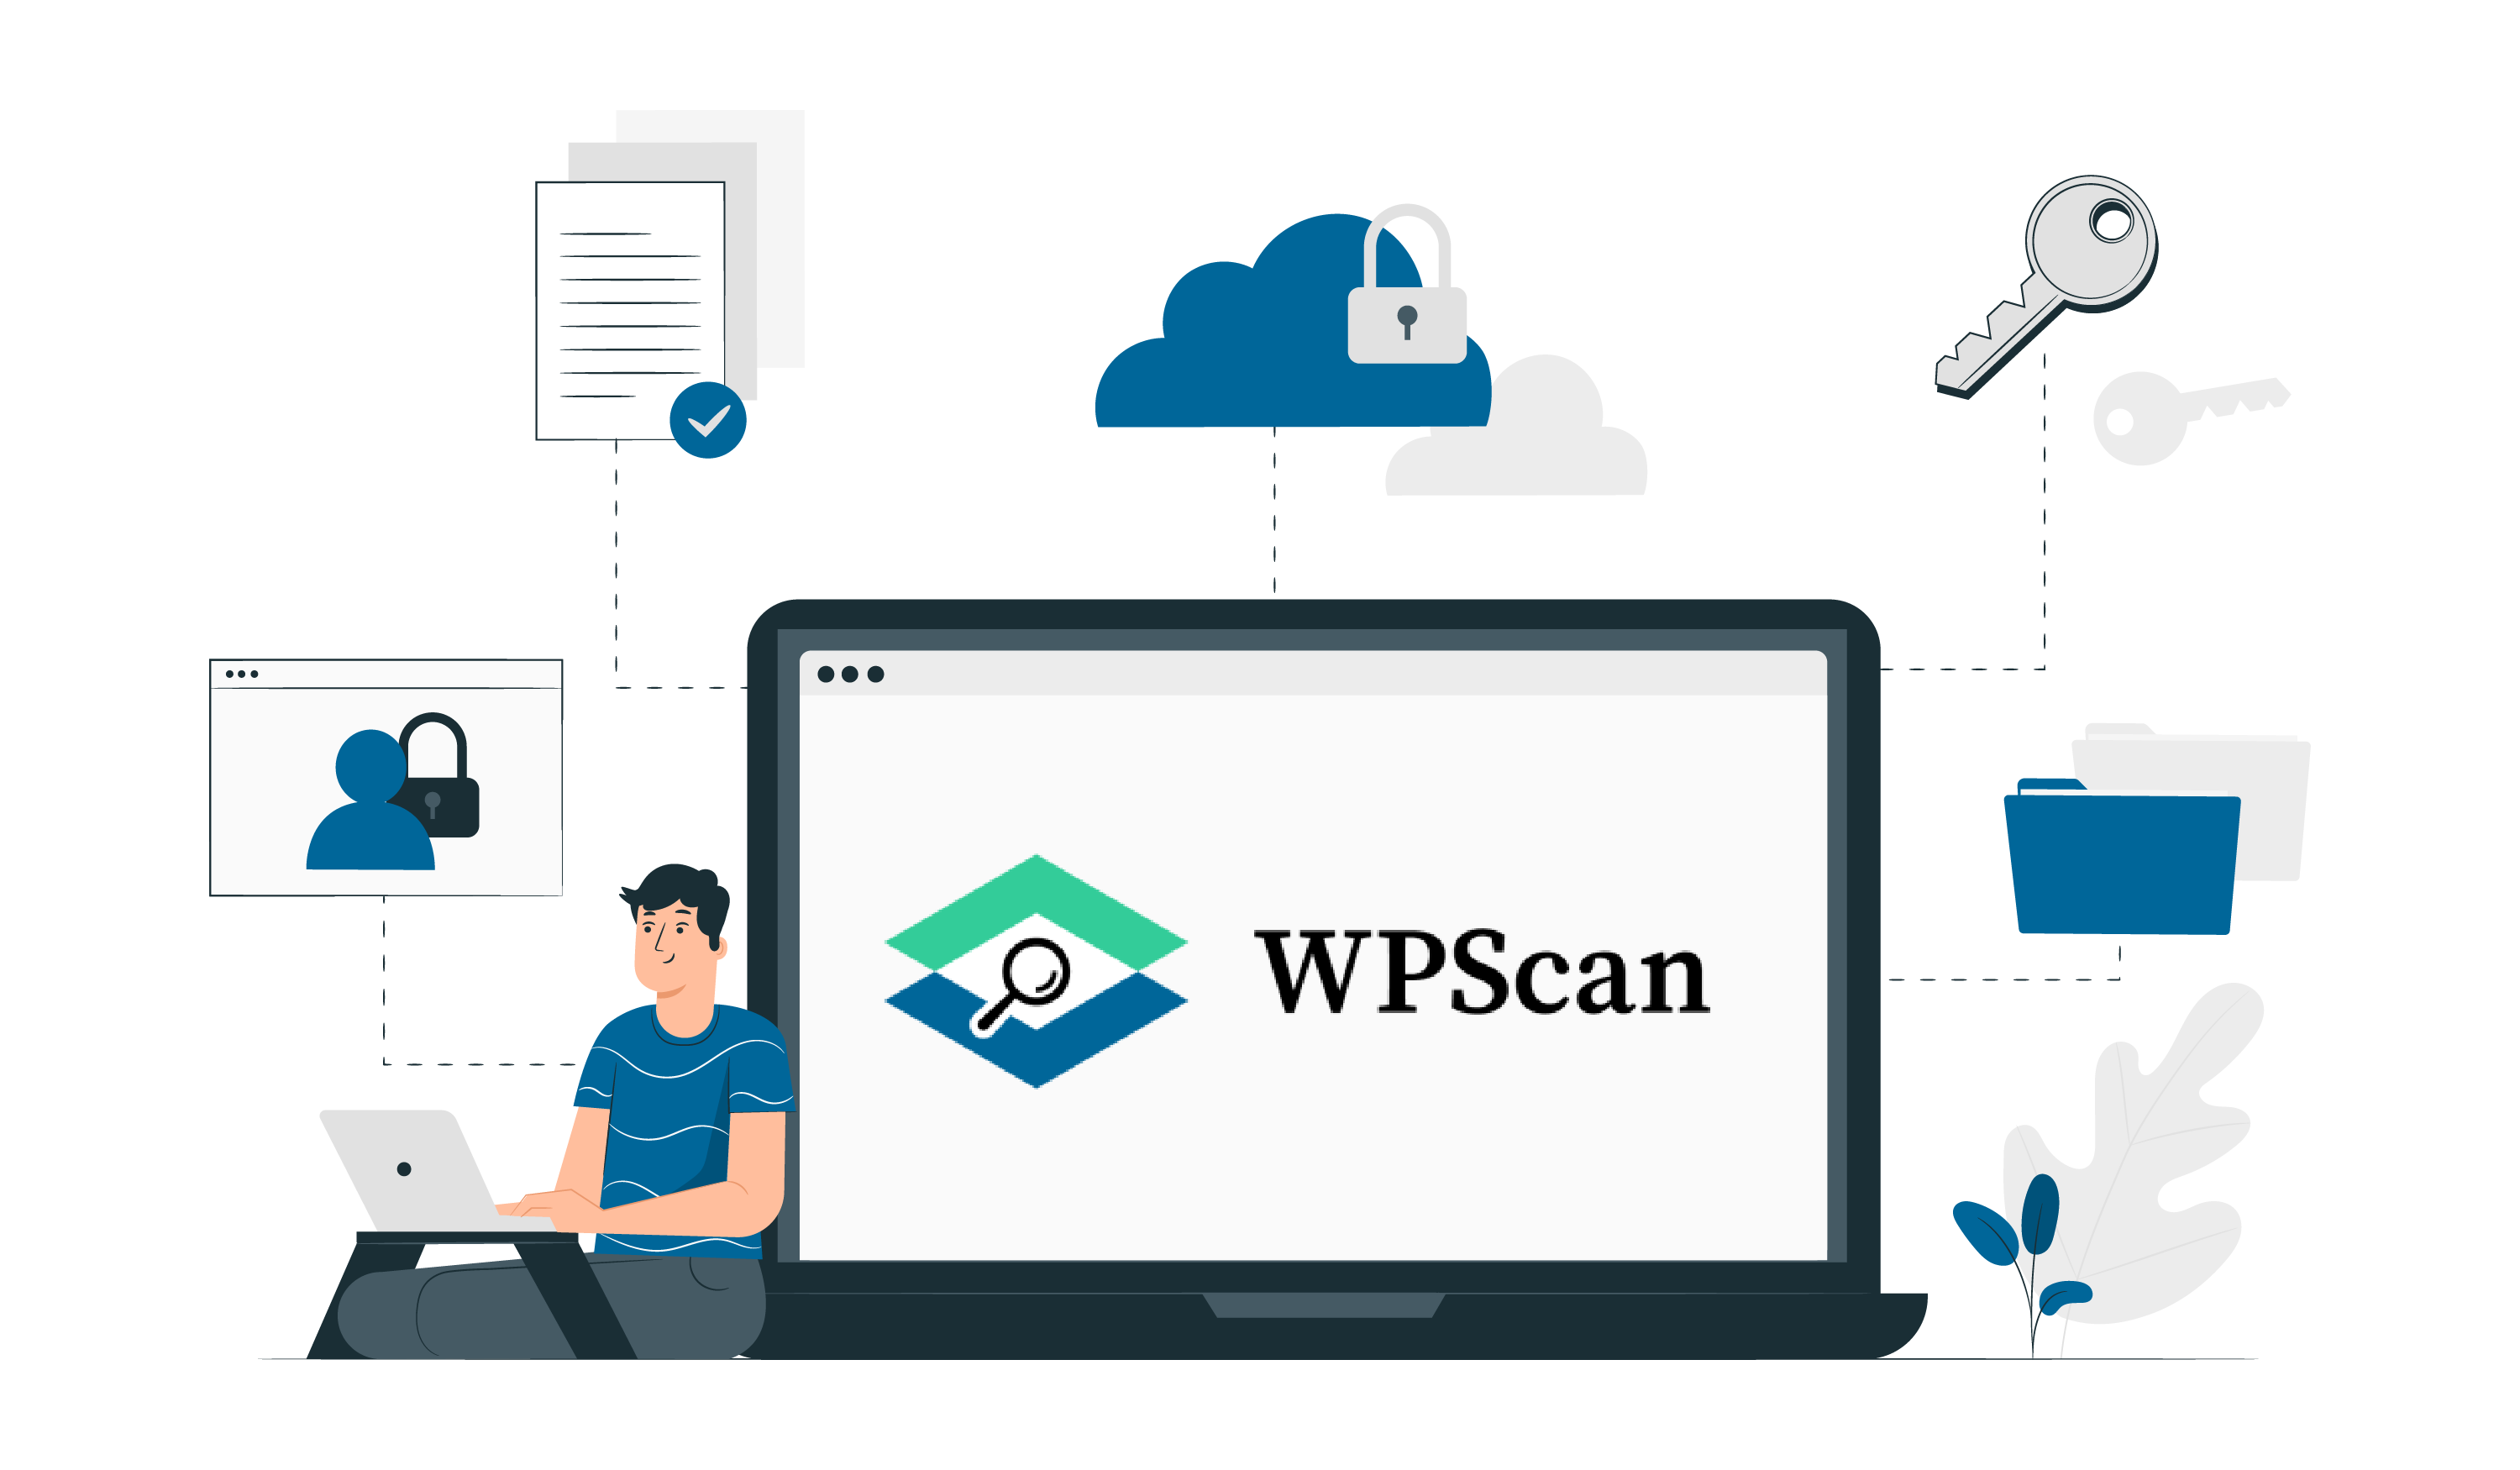 How to use WPScan